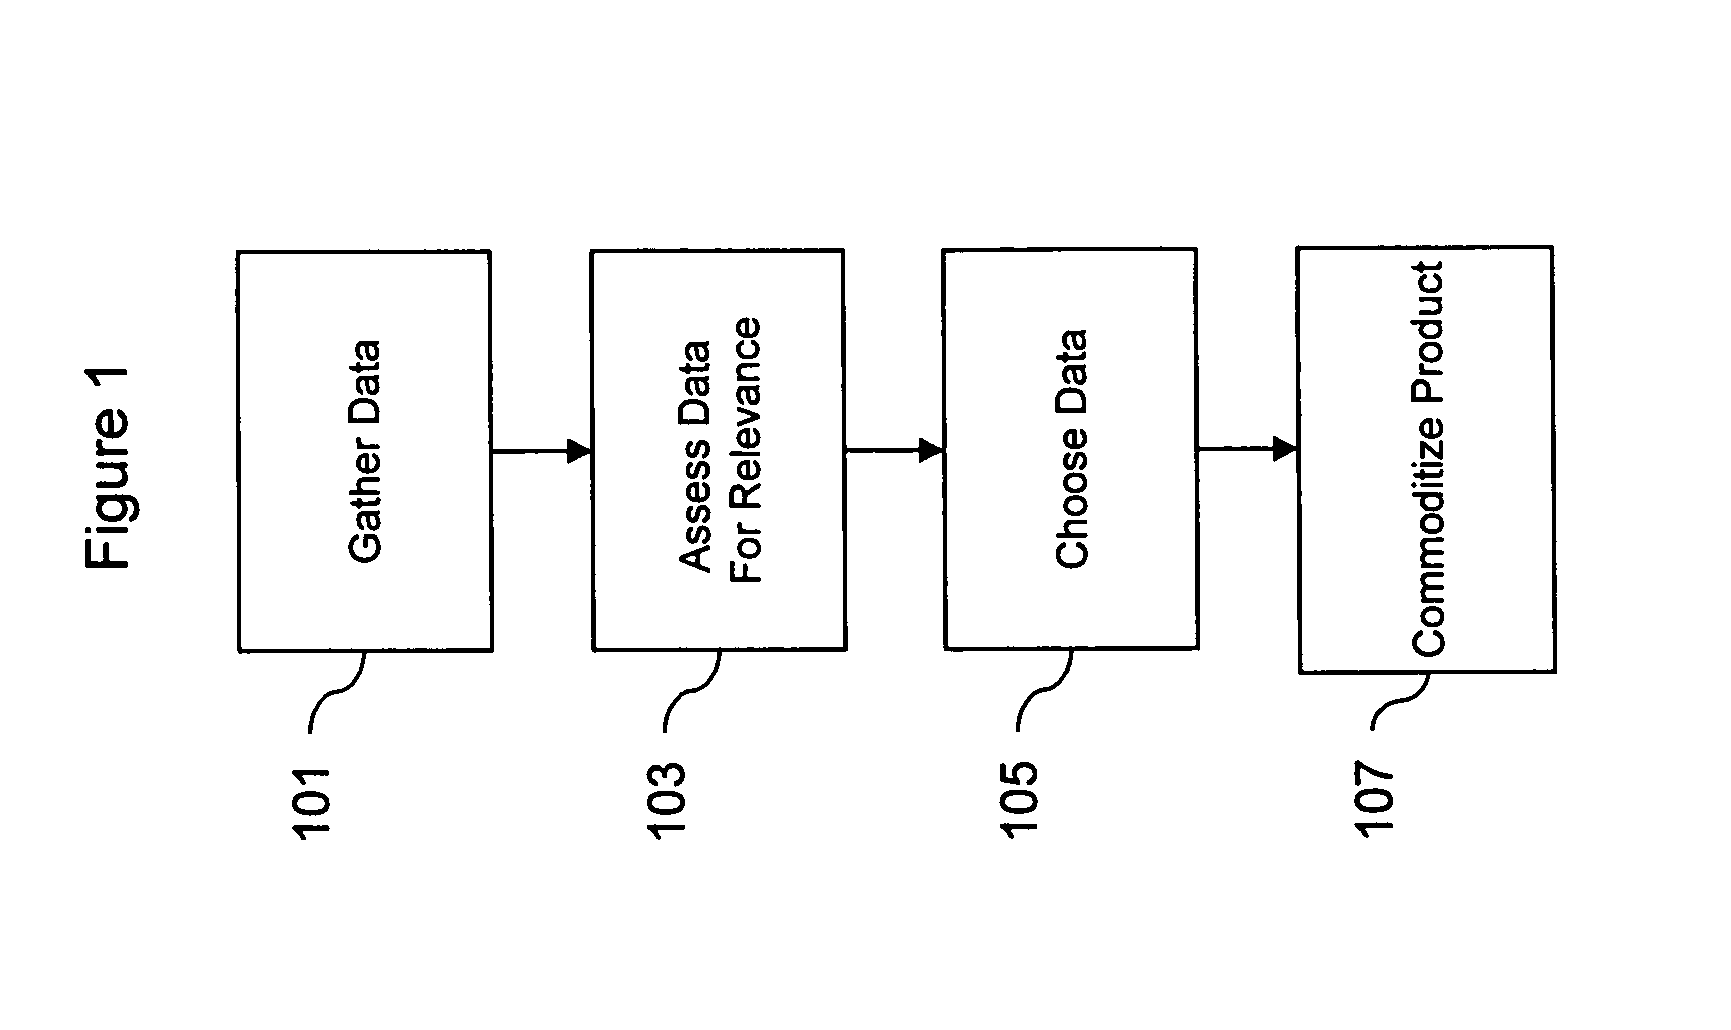 Method of creating and utilizing healthcare related commodoties